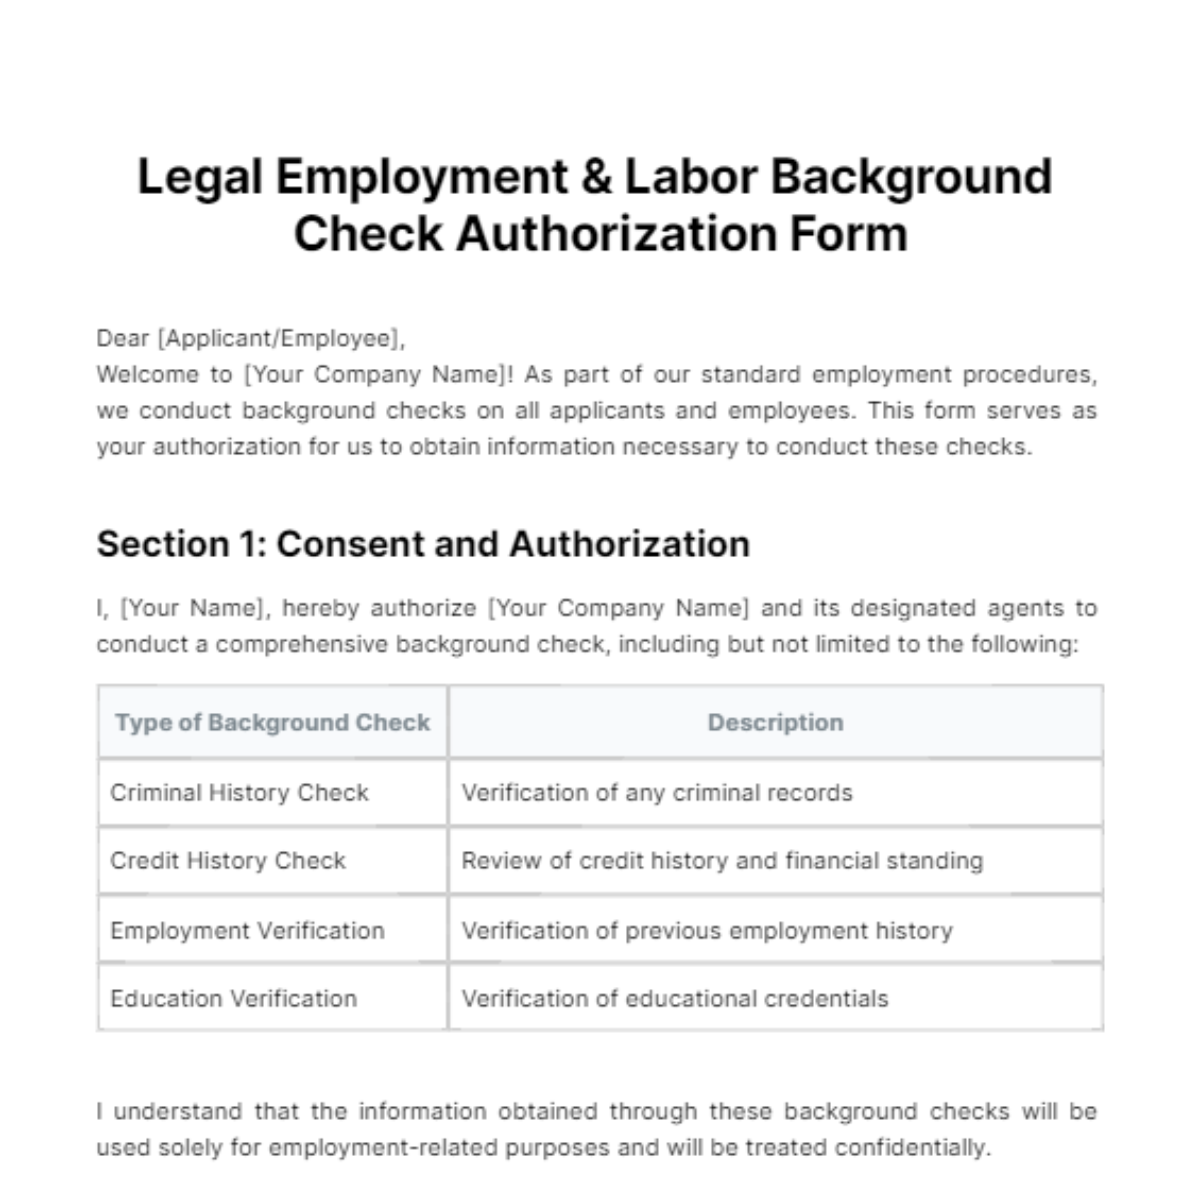 Free Legal Employment & Labor Background Check Authorization Form Template